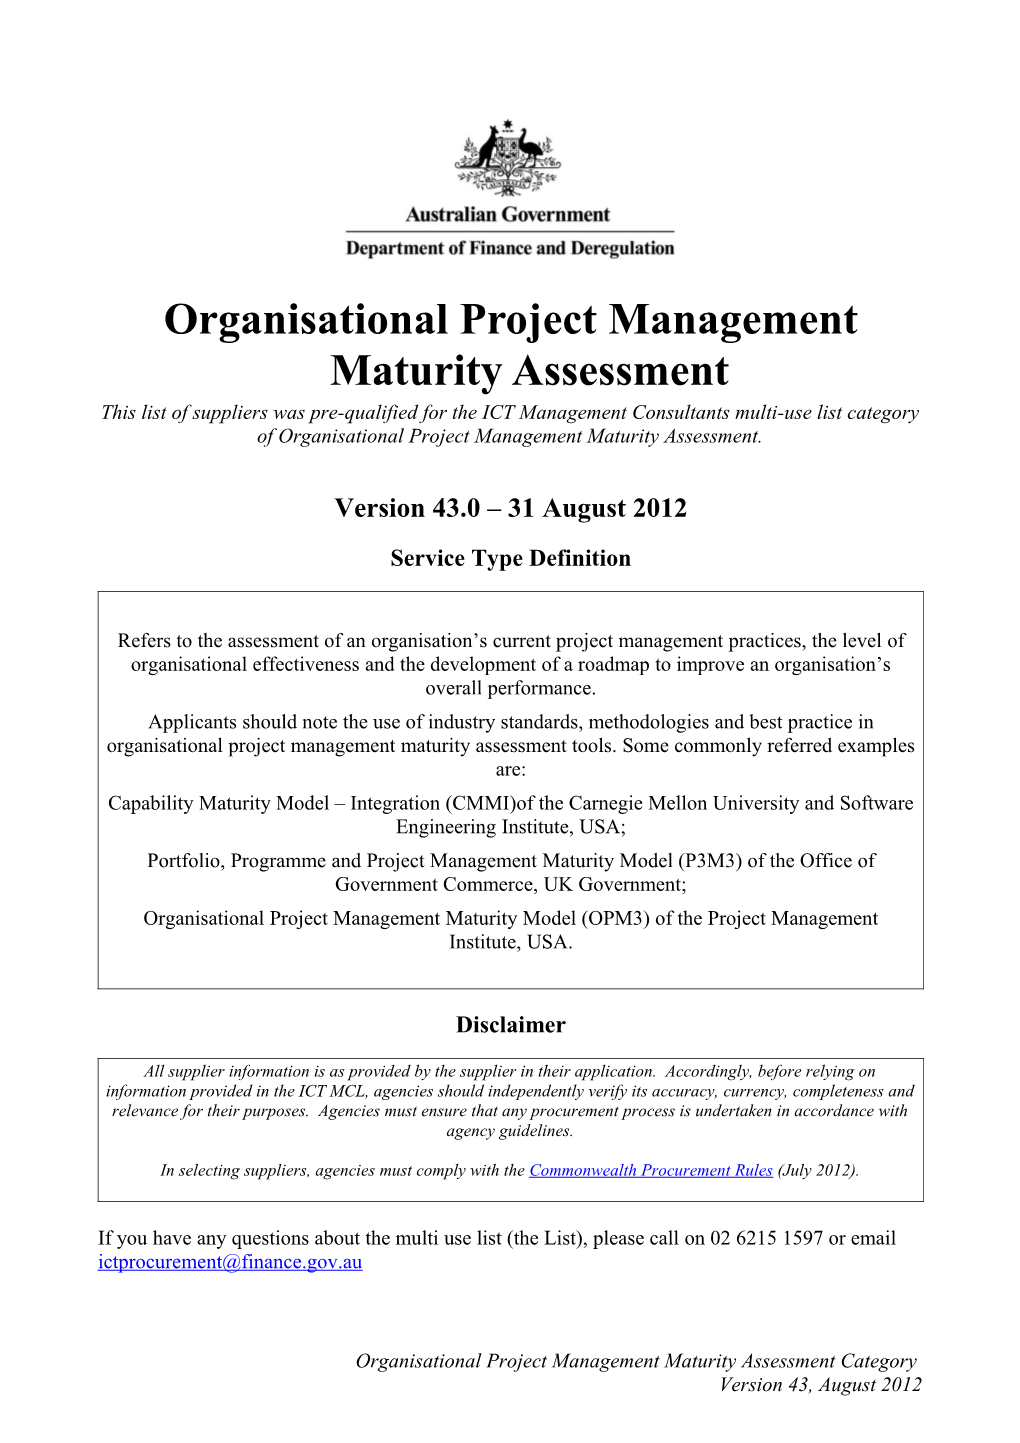 Management Consultants Multi Use List Suppliers of Organisational Project Management Maturity